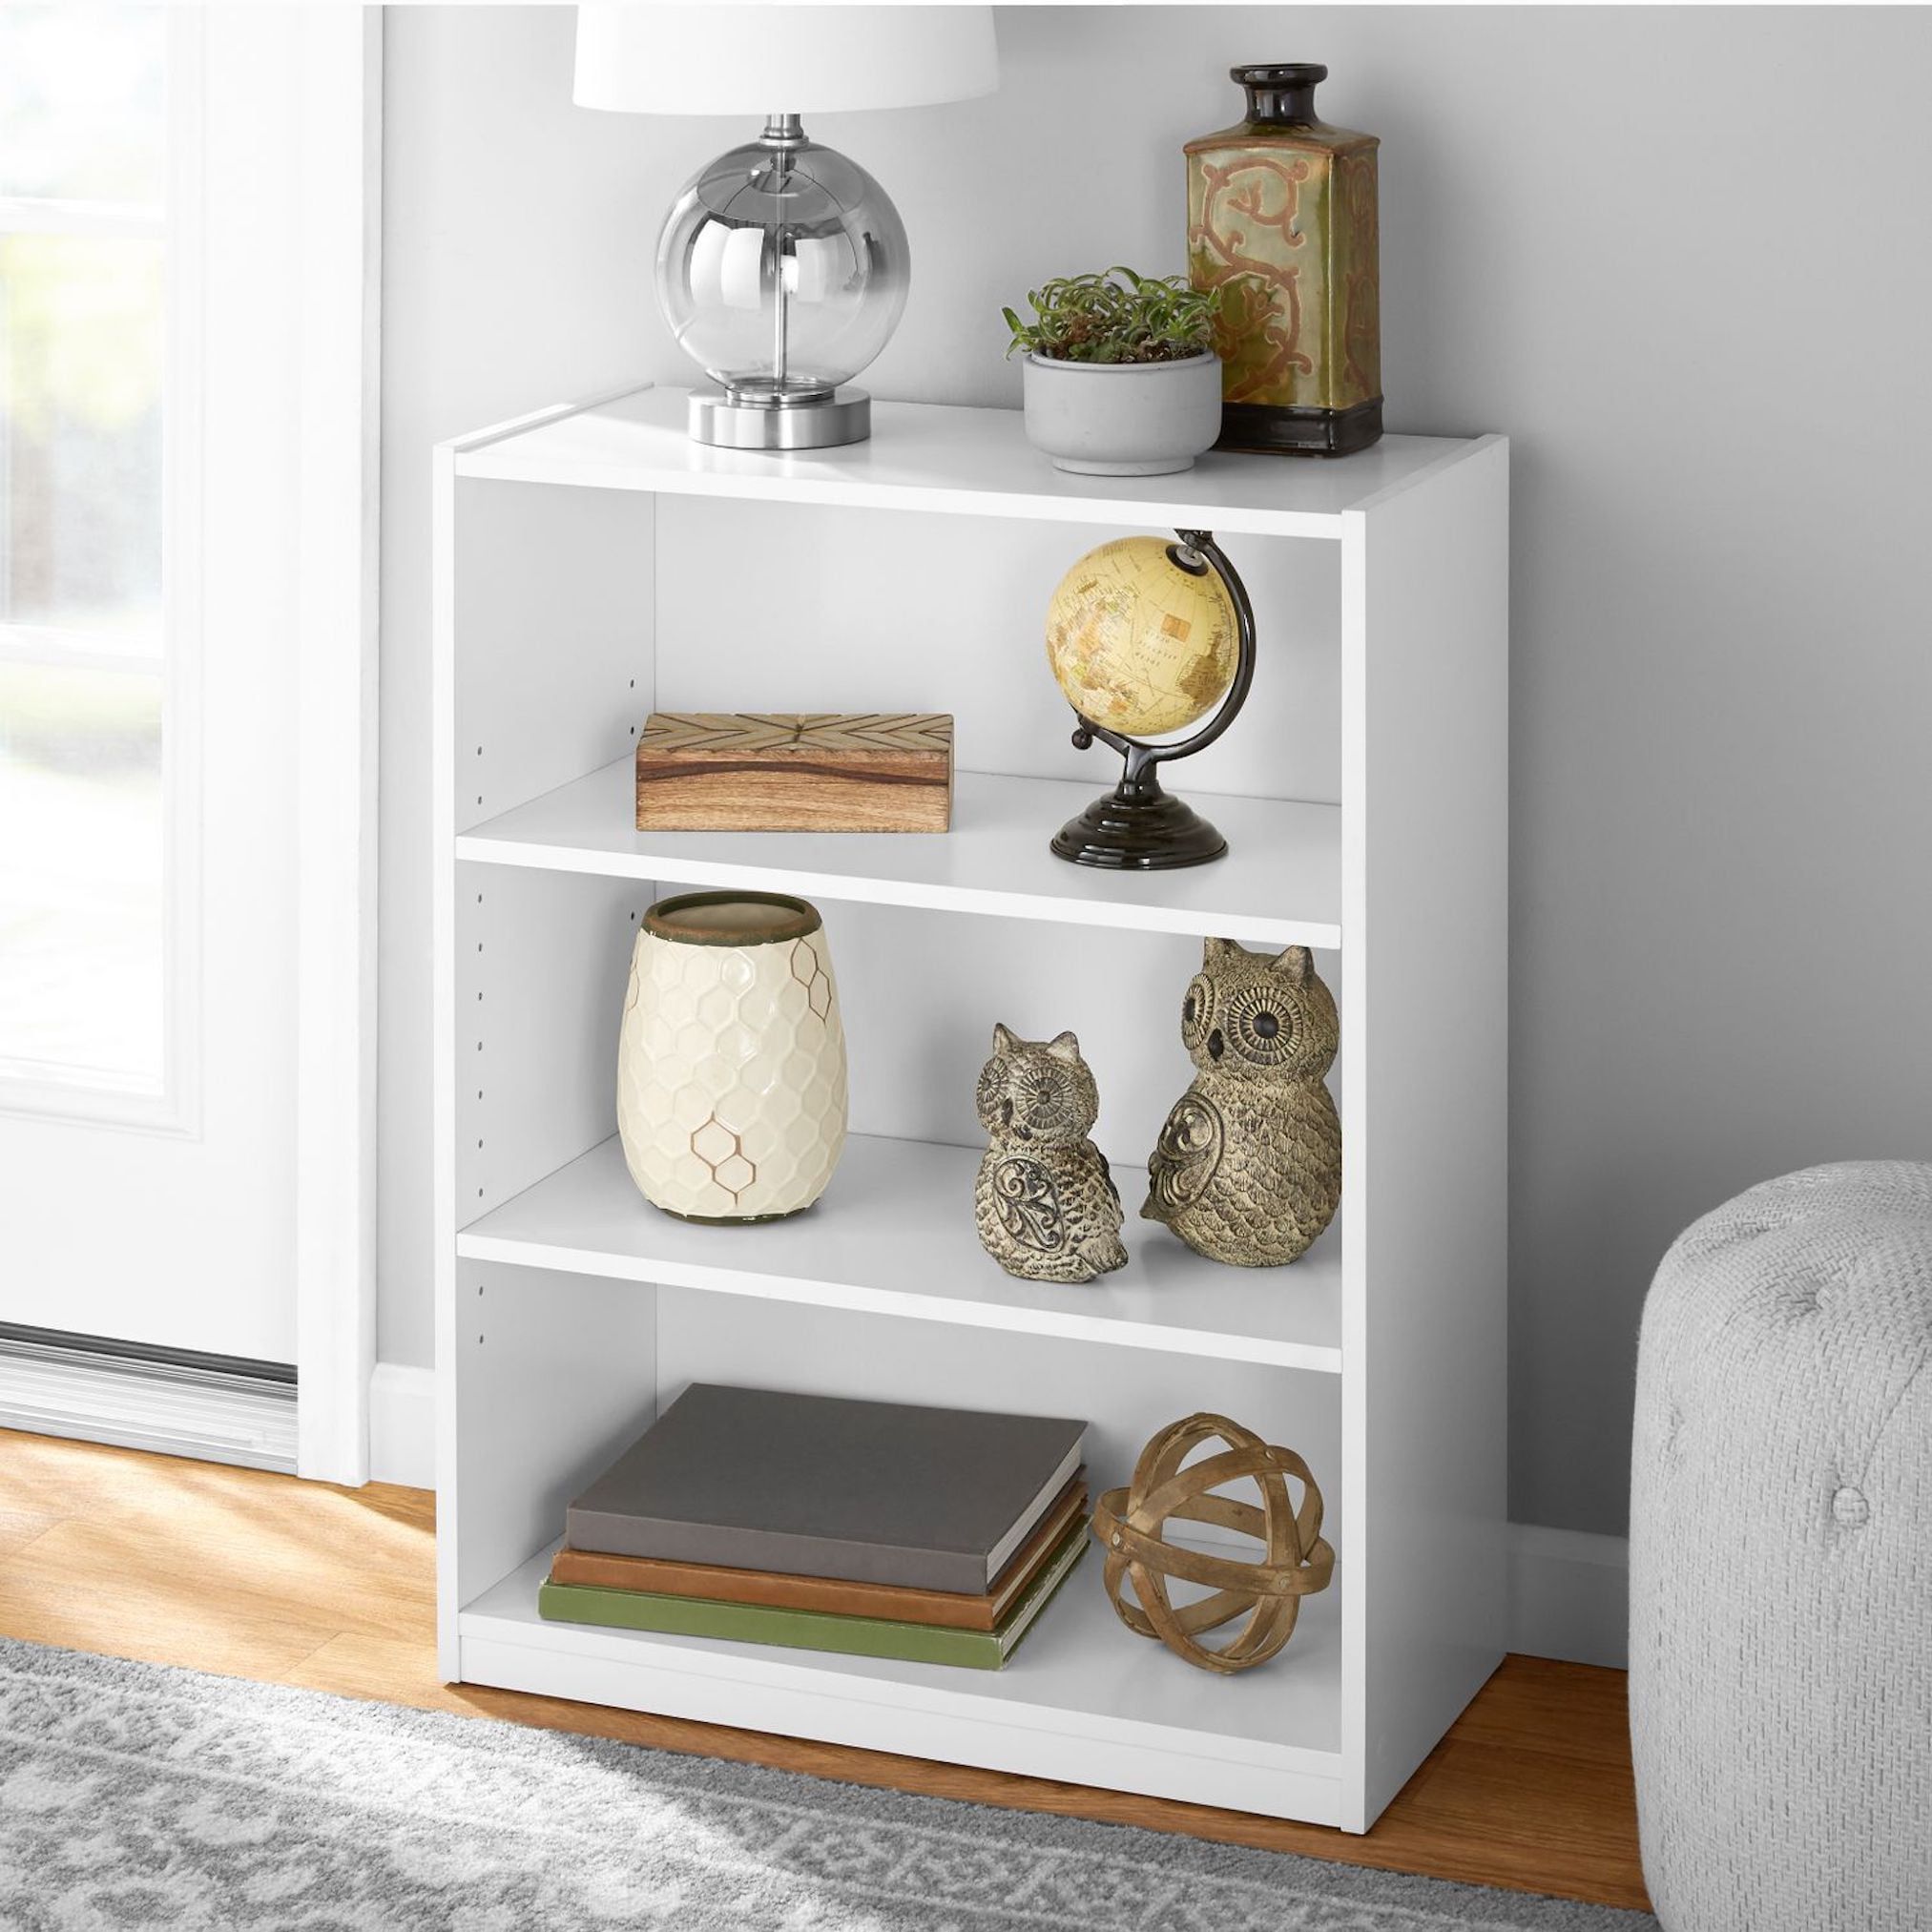 Mainstays 3 Shelf Bookcase With Adjustable Shelves, White – Walmart Intended For Mirrored Bookcases With 3 Shelves (View 10 of 15)